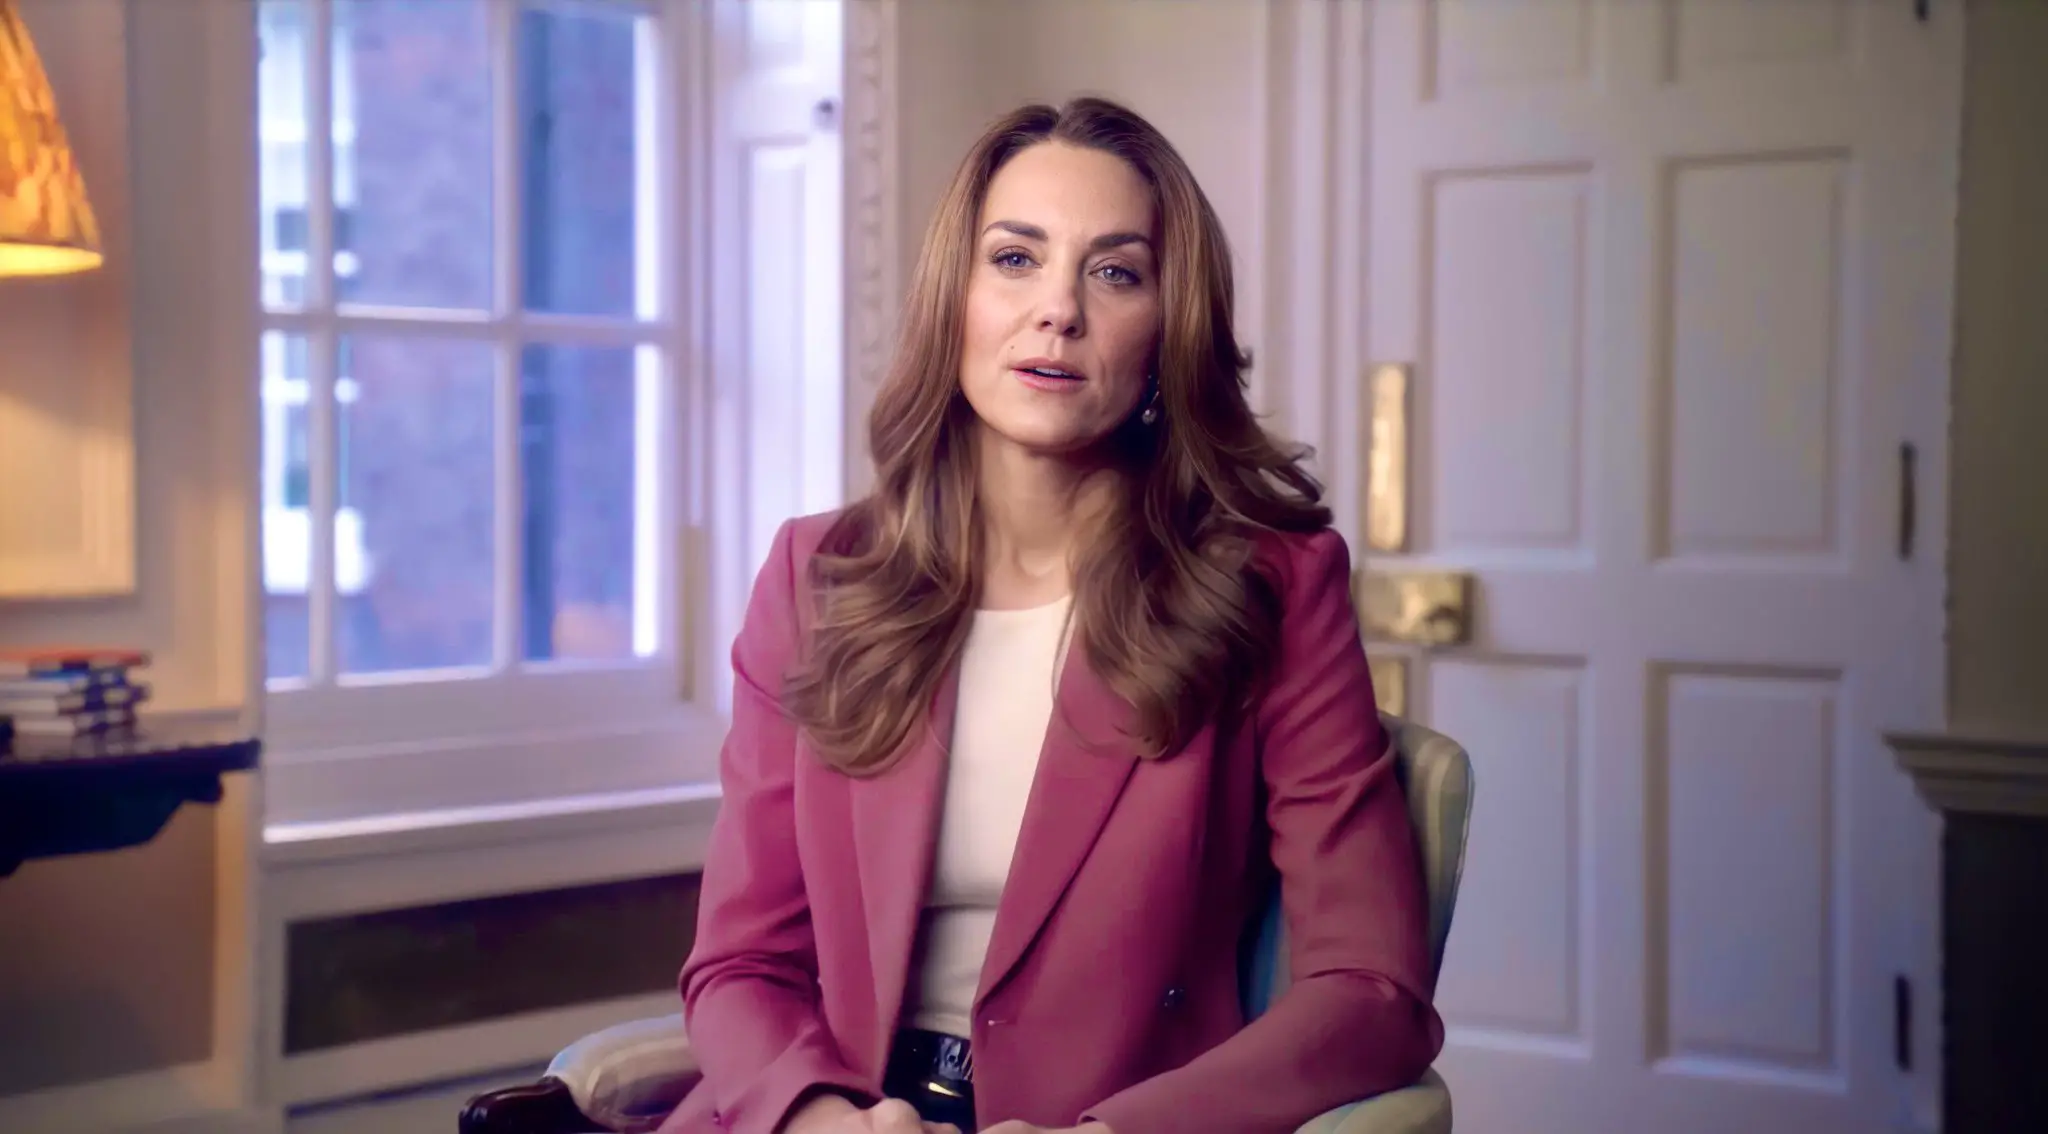 The Duchess of Cambridge joined the panel of experts at the Royal forum discussing 5 Big Insights